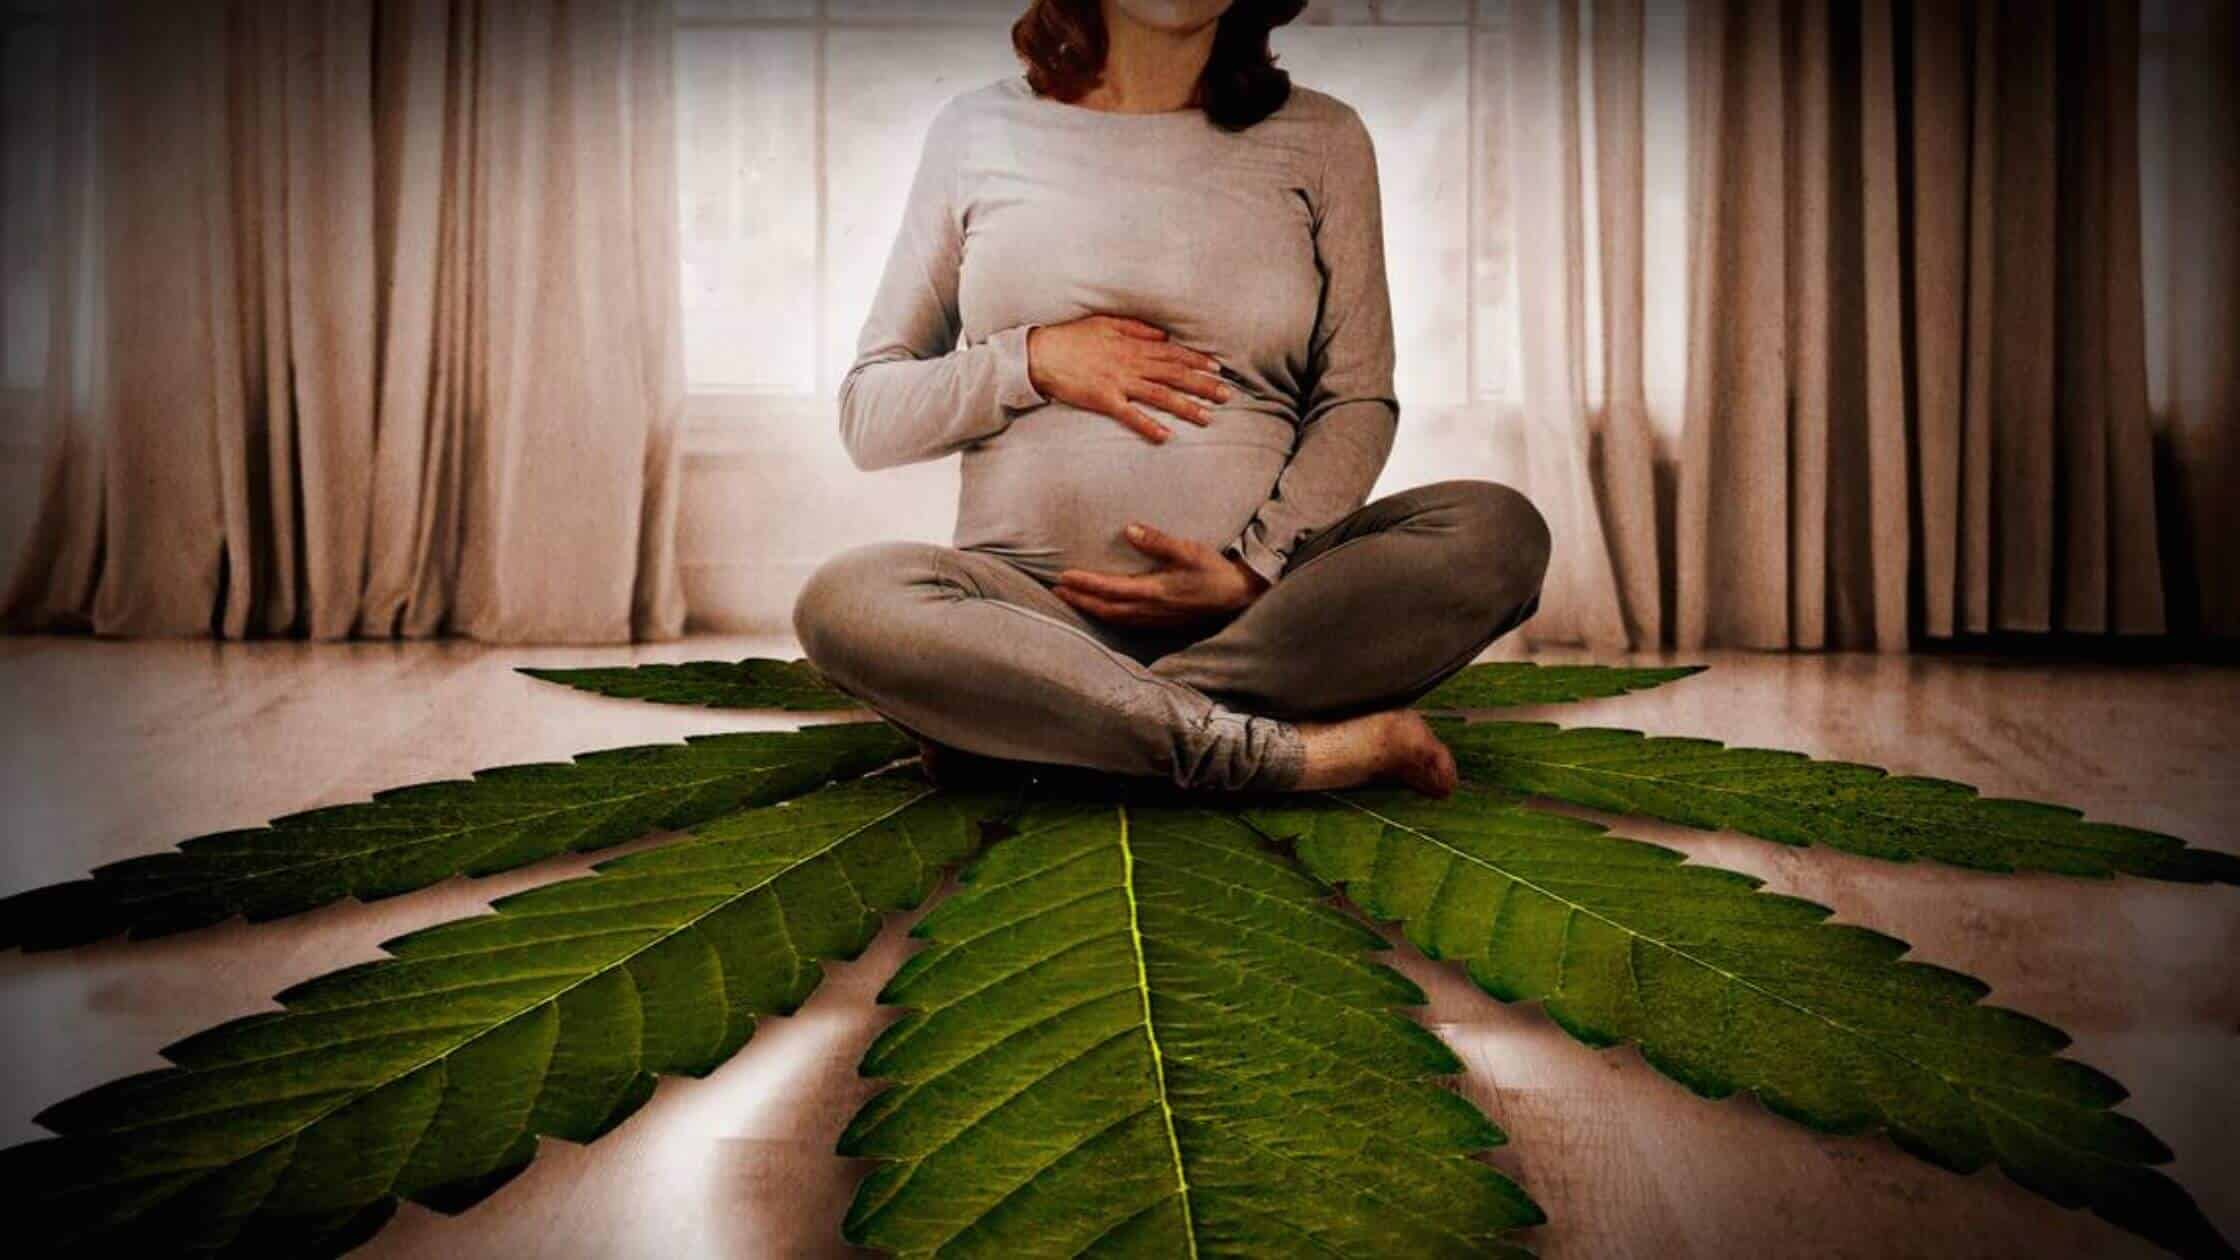 Marijuana Use In Pregnancy Linked To Mental Health Issues In Children